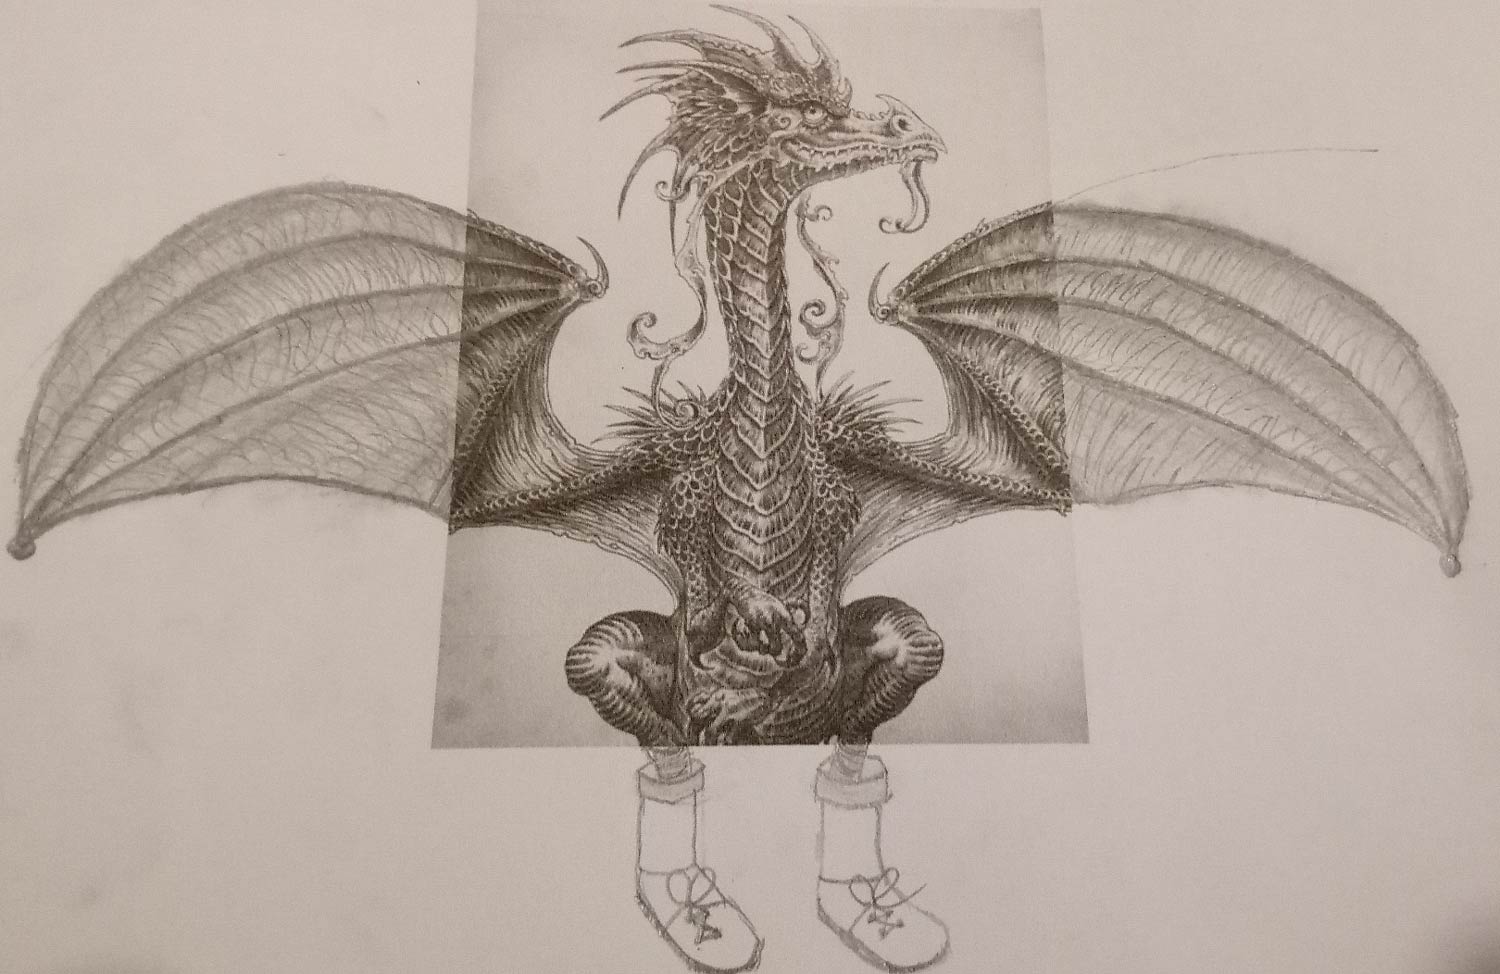 My little daughter had to draw the wings and feet of the dragon as homework